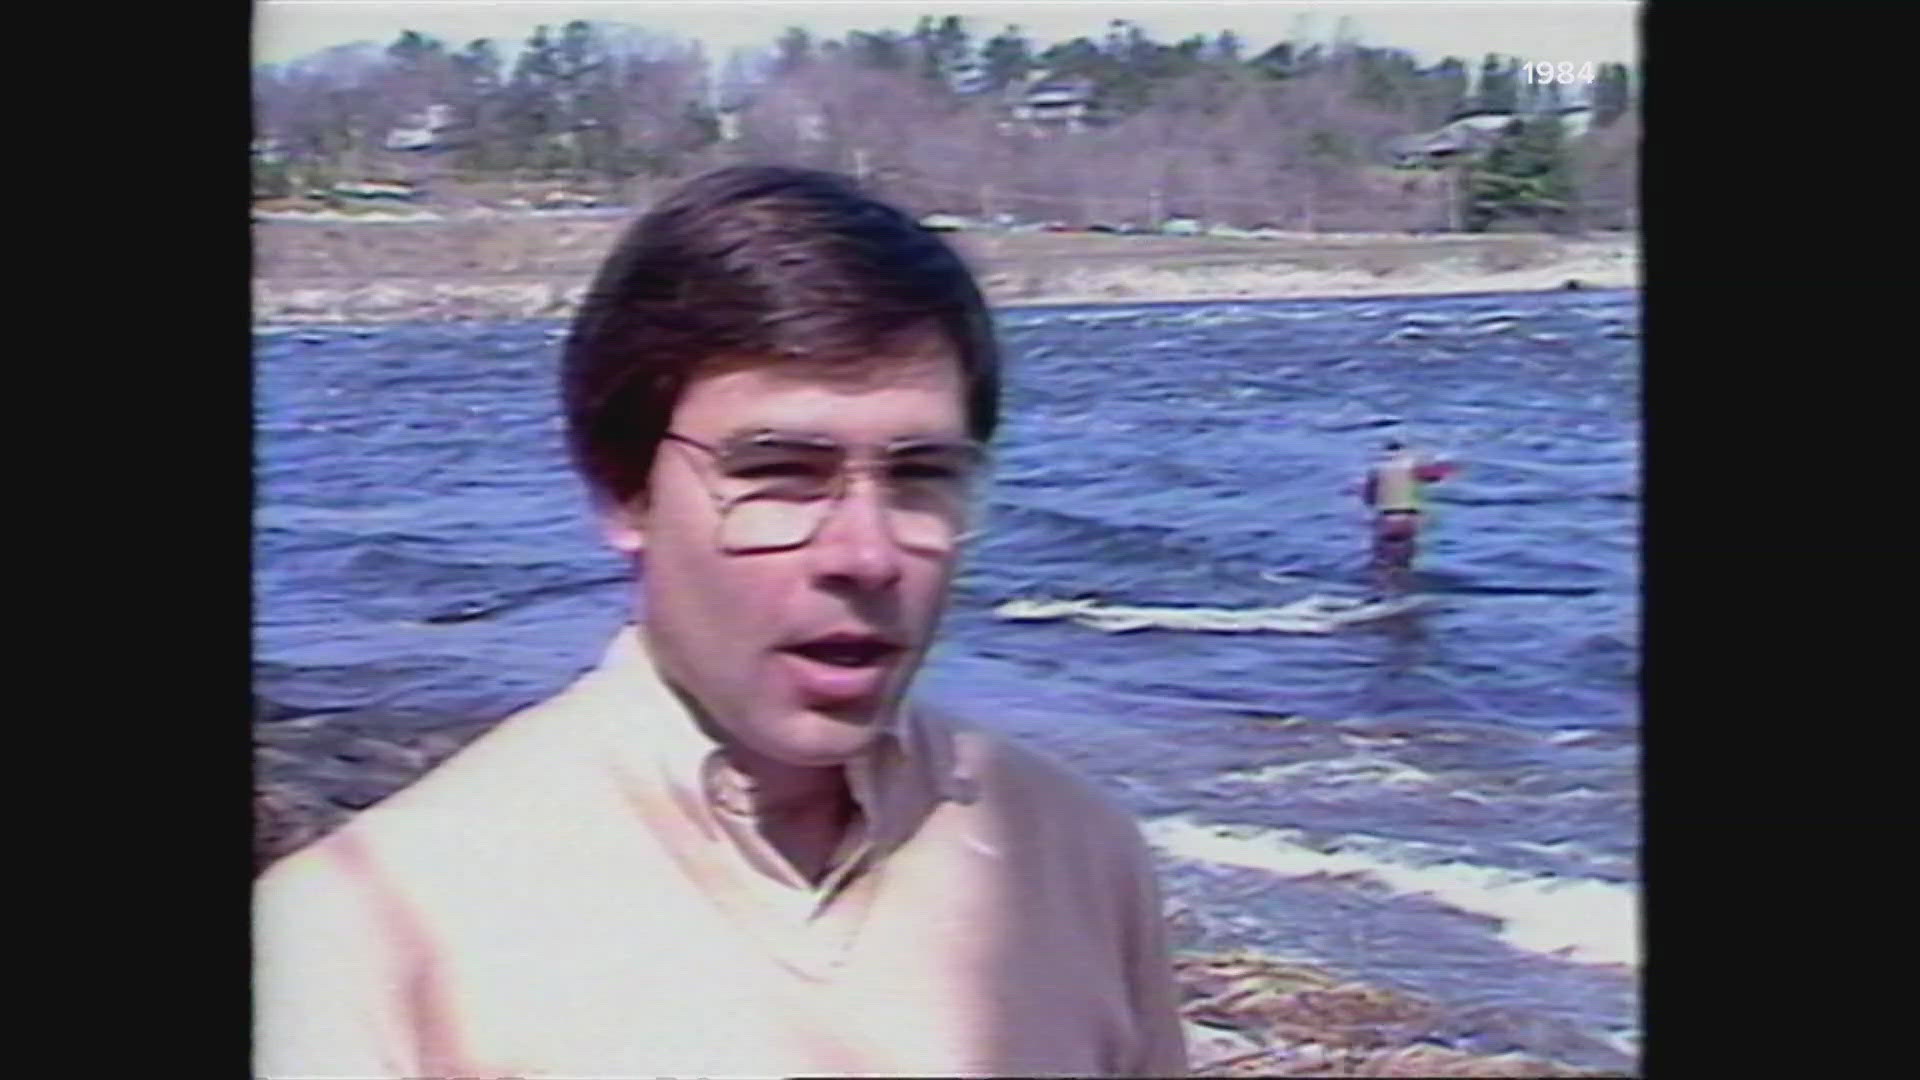 On a bluebird day in Bangor 40 years ago, anglers were celebrating the first day of fishing for salmon on the Penobscot River. It's something you can't do anymore.